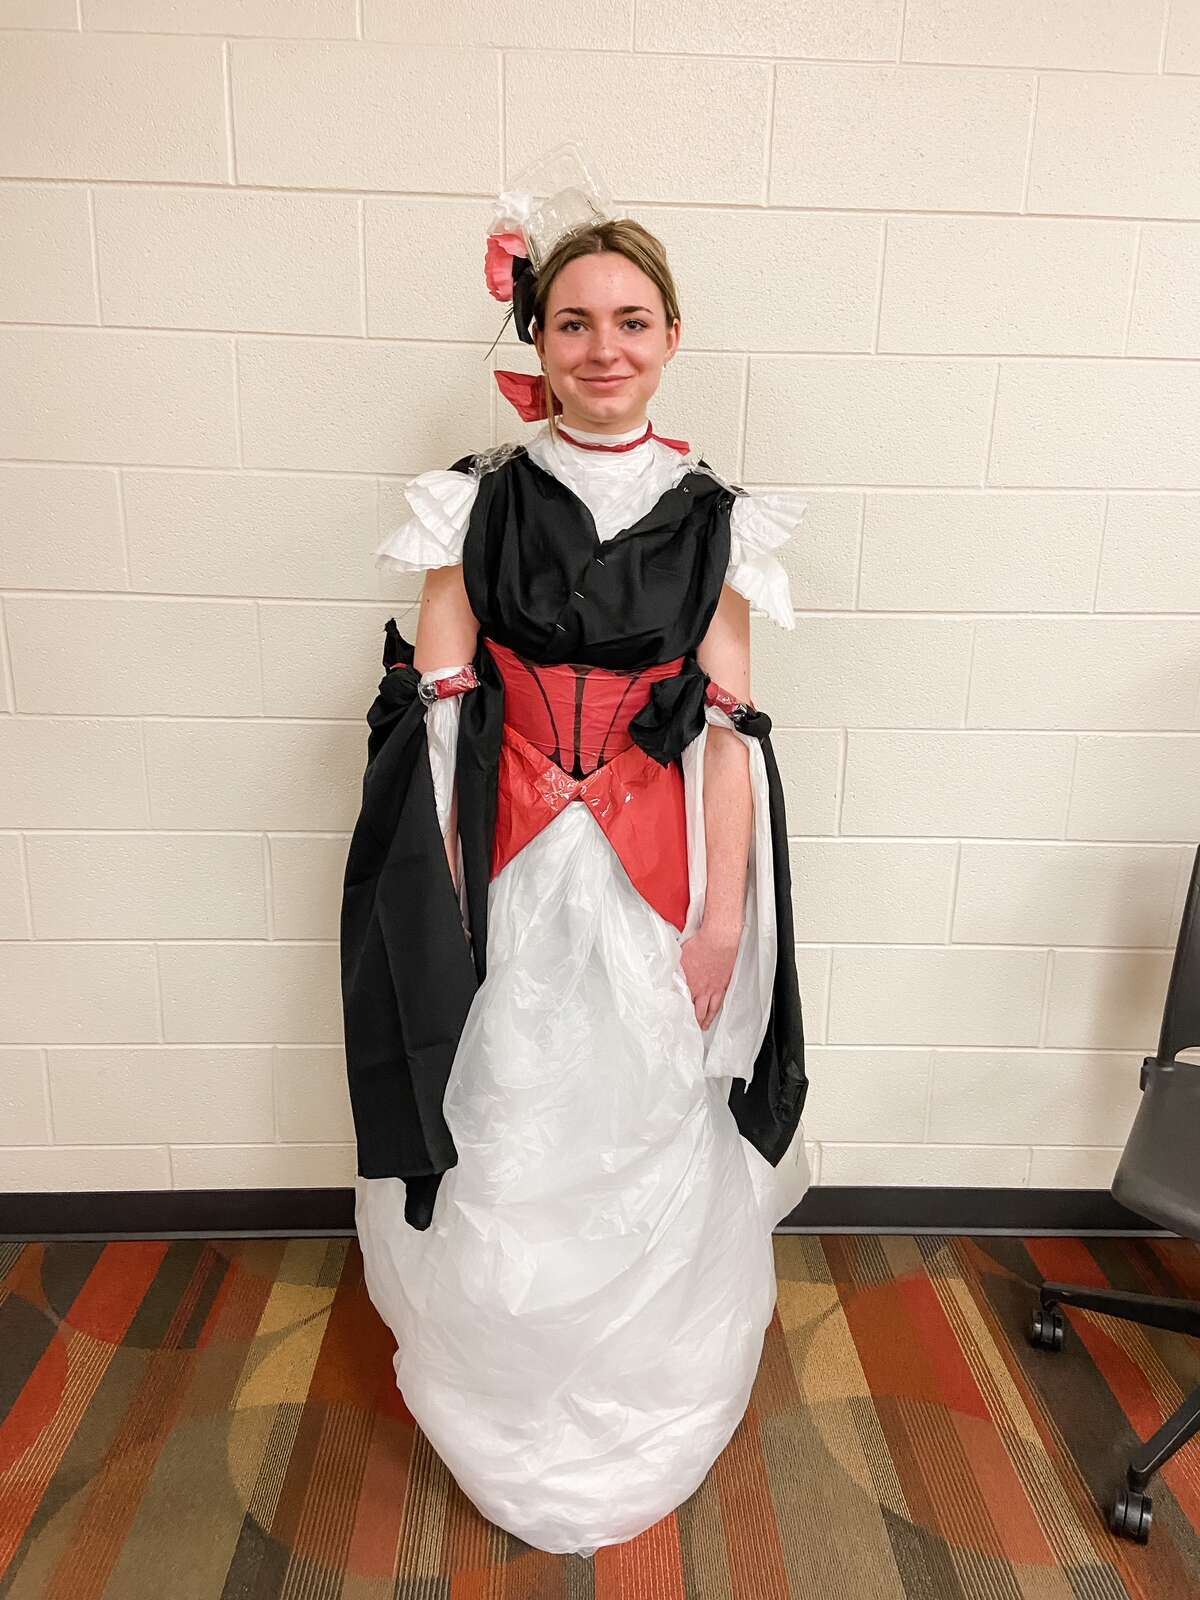 Big Rapids students Corbin Richeson, Paisley Prosser, and Abbie Strasser participated and made a fashion statement by turning different textiles and trash items into a wearable gown.